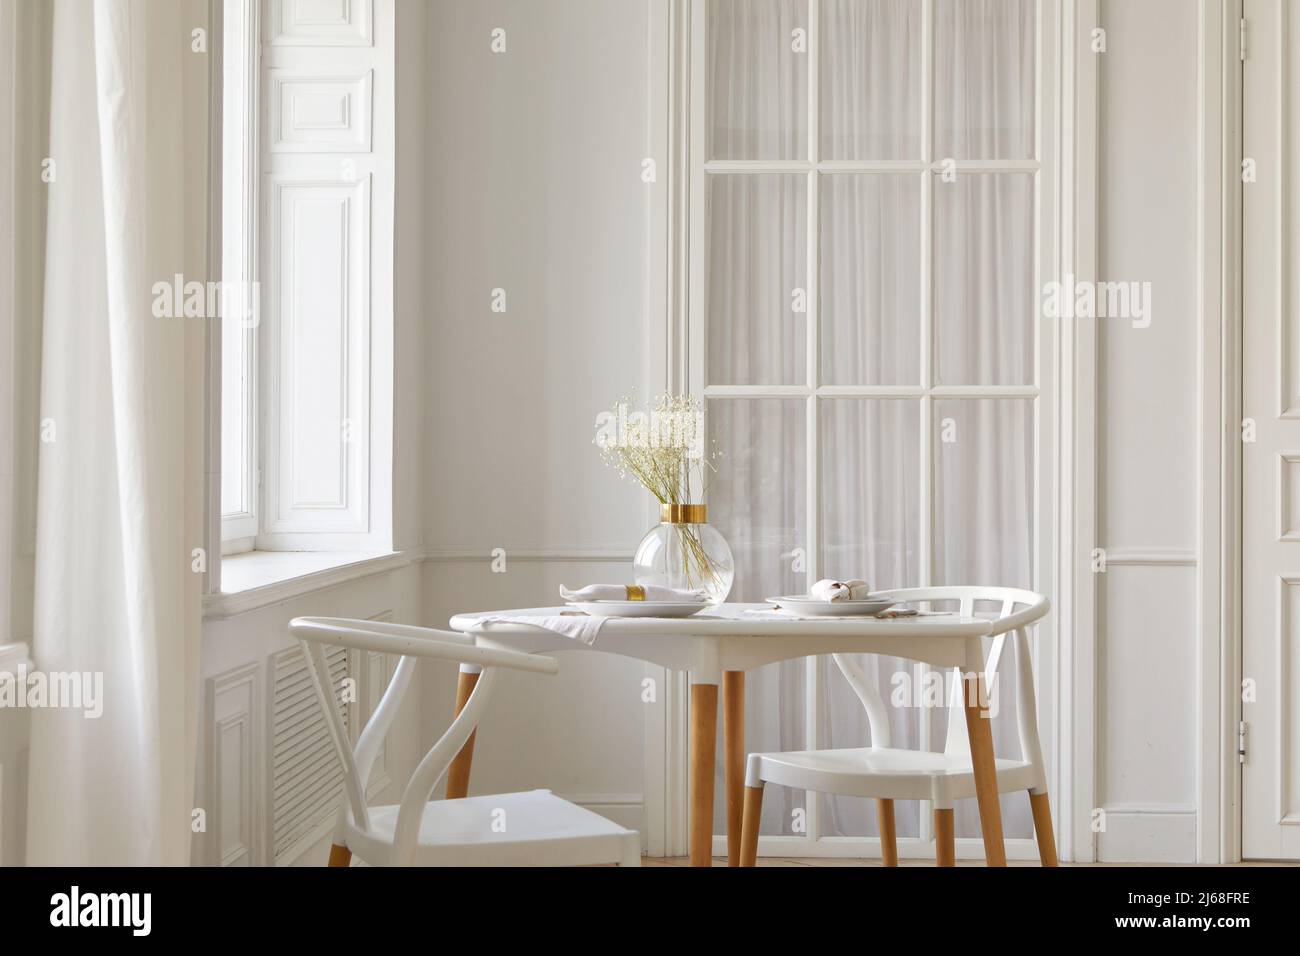 Glass vase with dried flowers and dishware placed on table near chairs and window in white spacious room at home Stock Photo